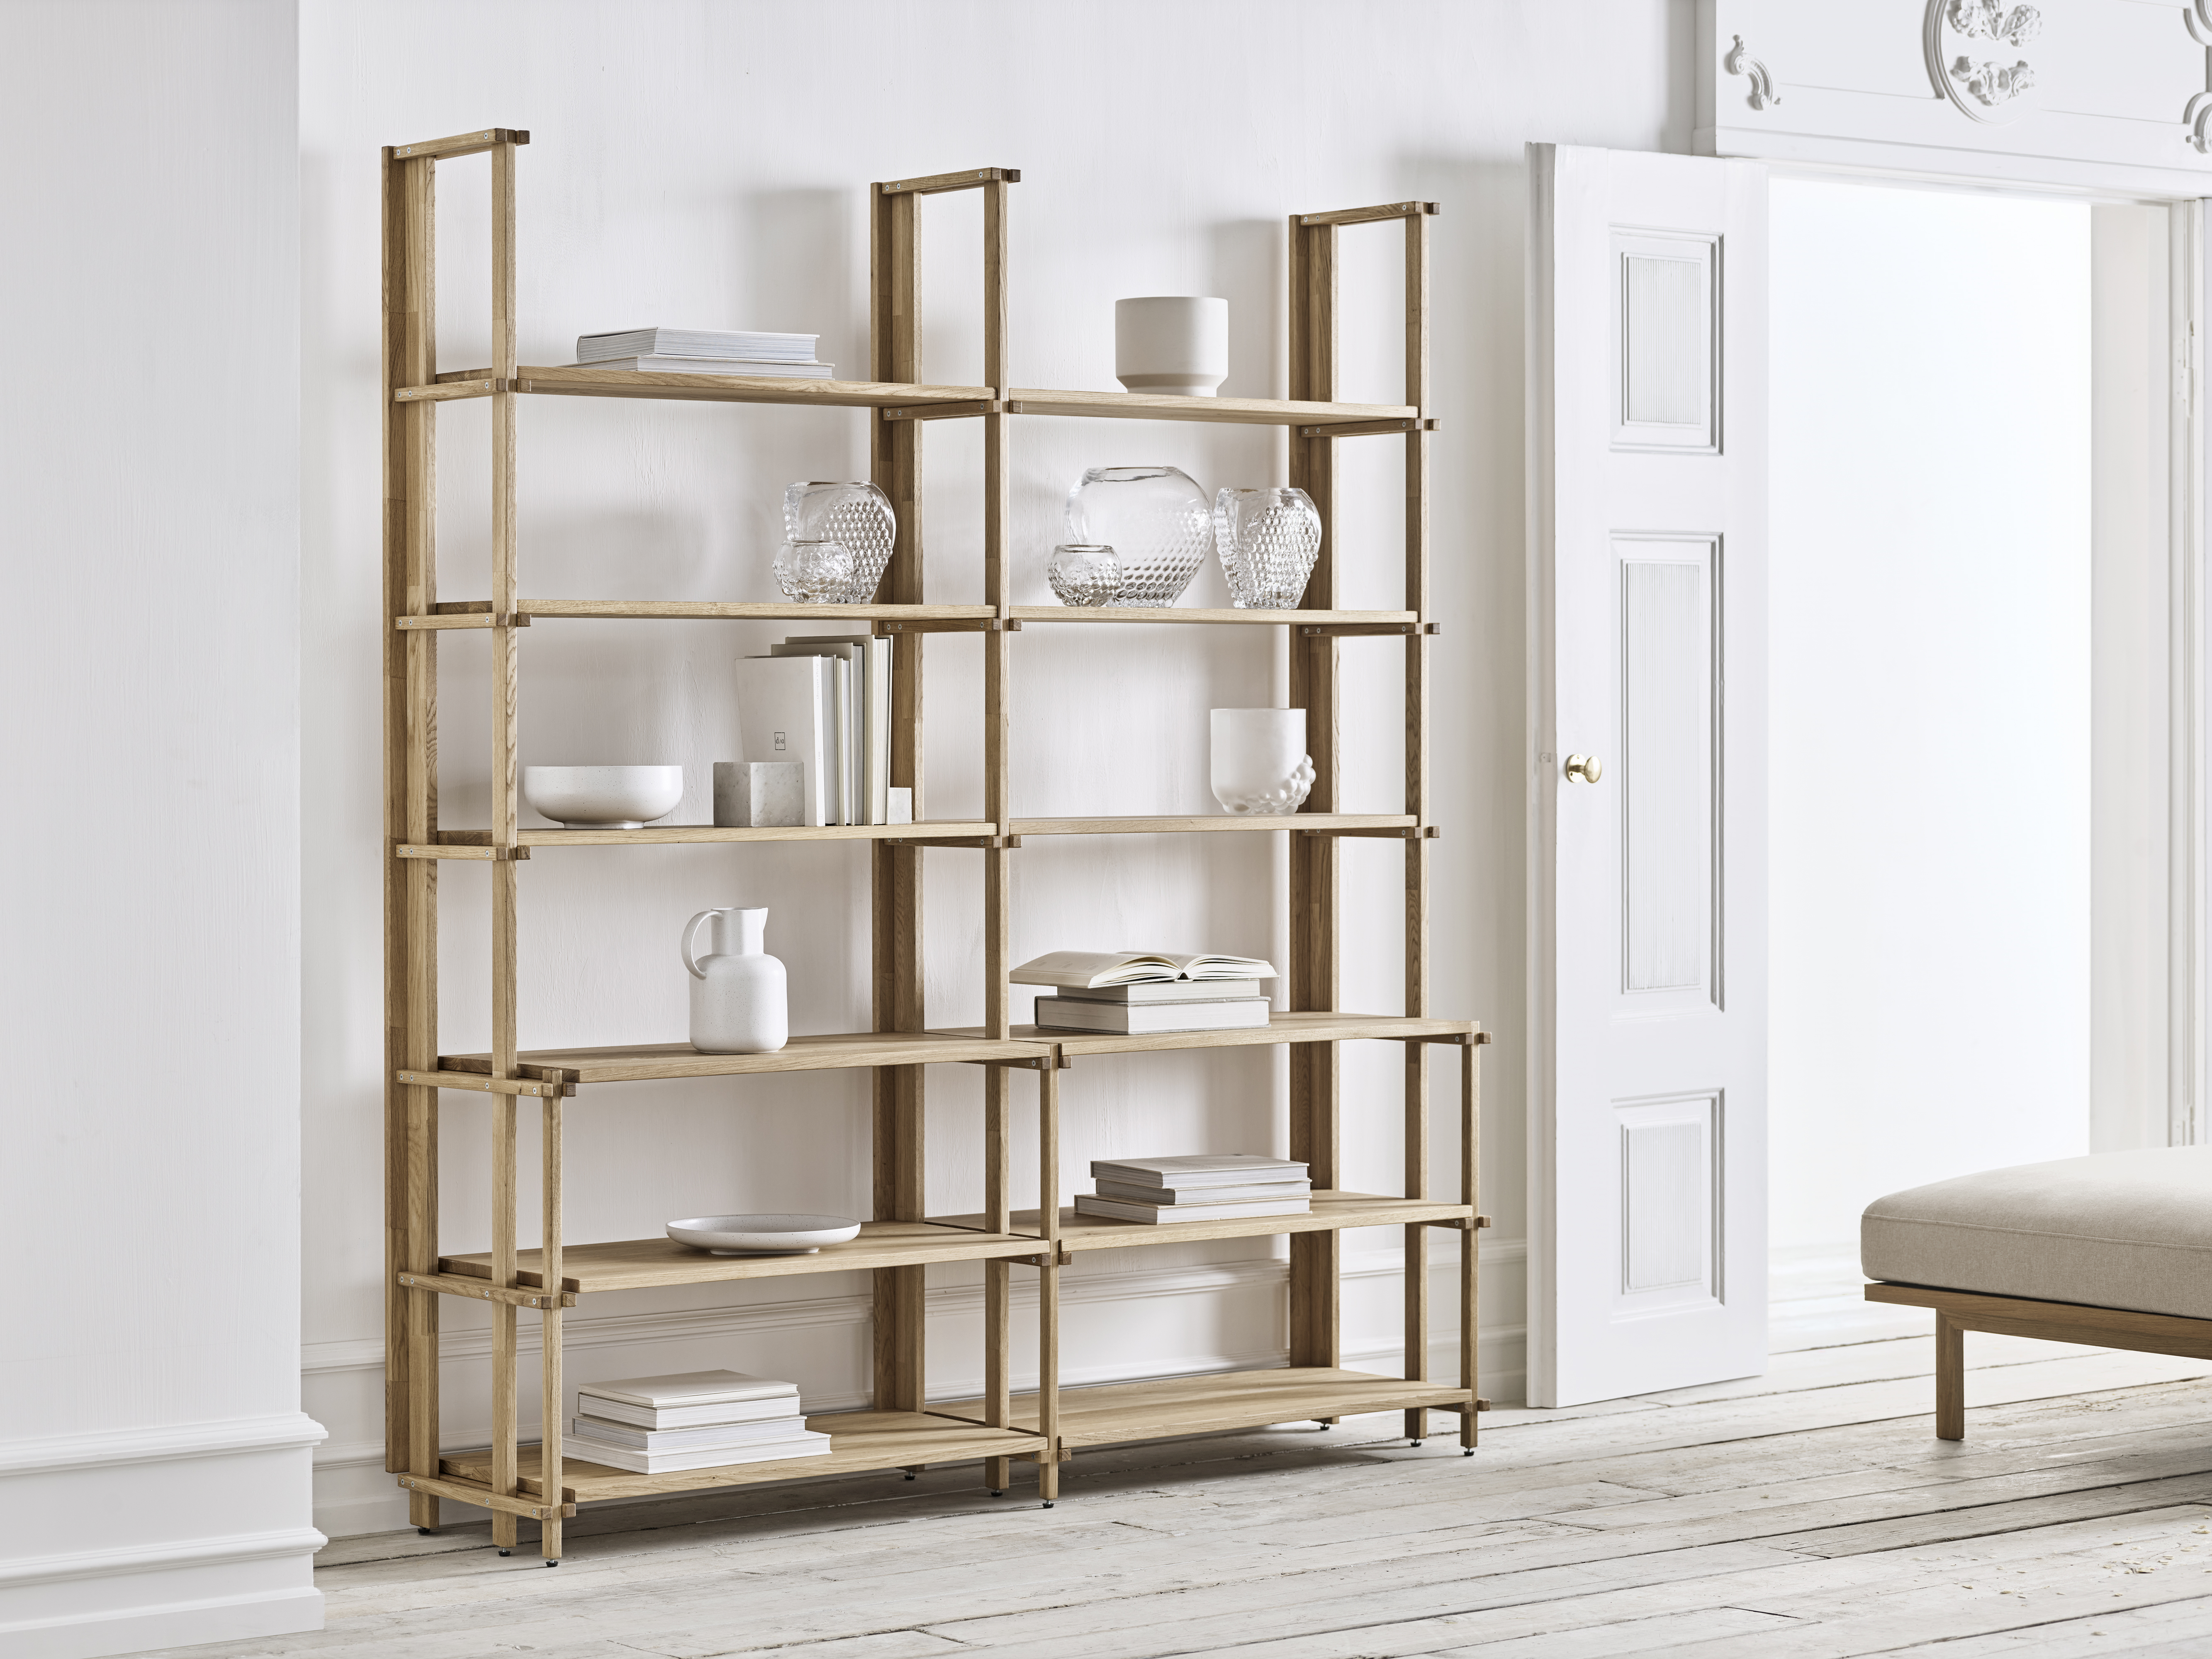 Storage | Classic design, inspired by nature Bolia